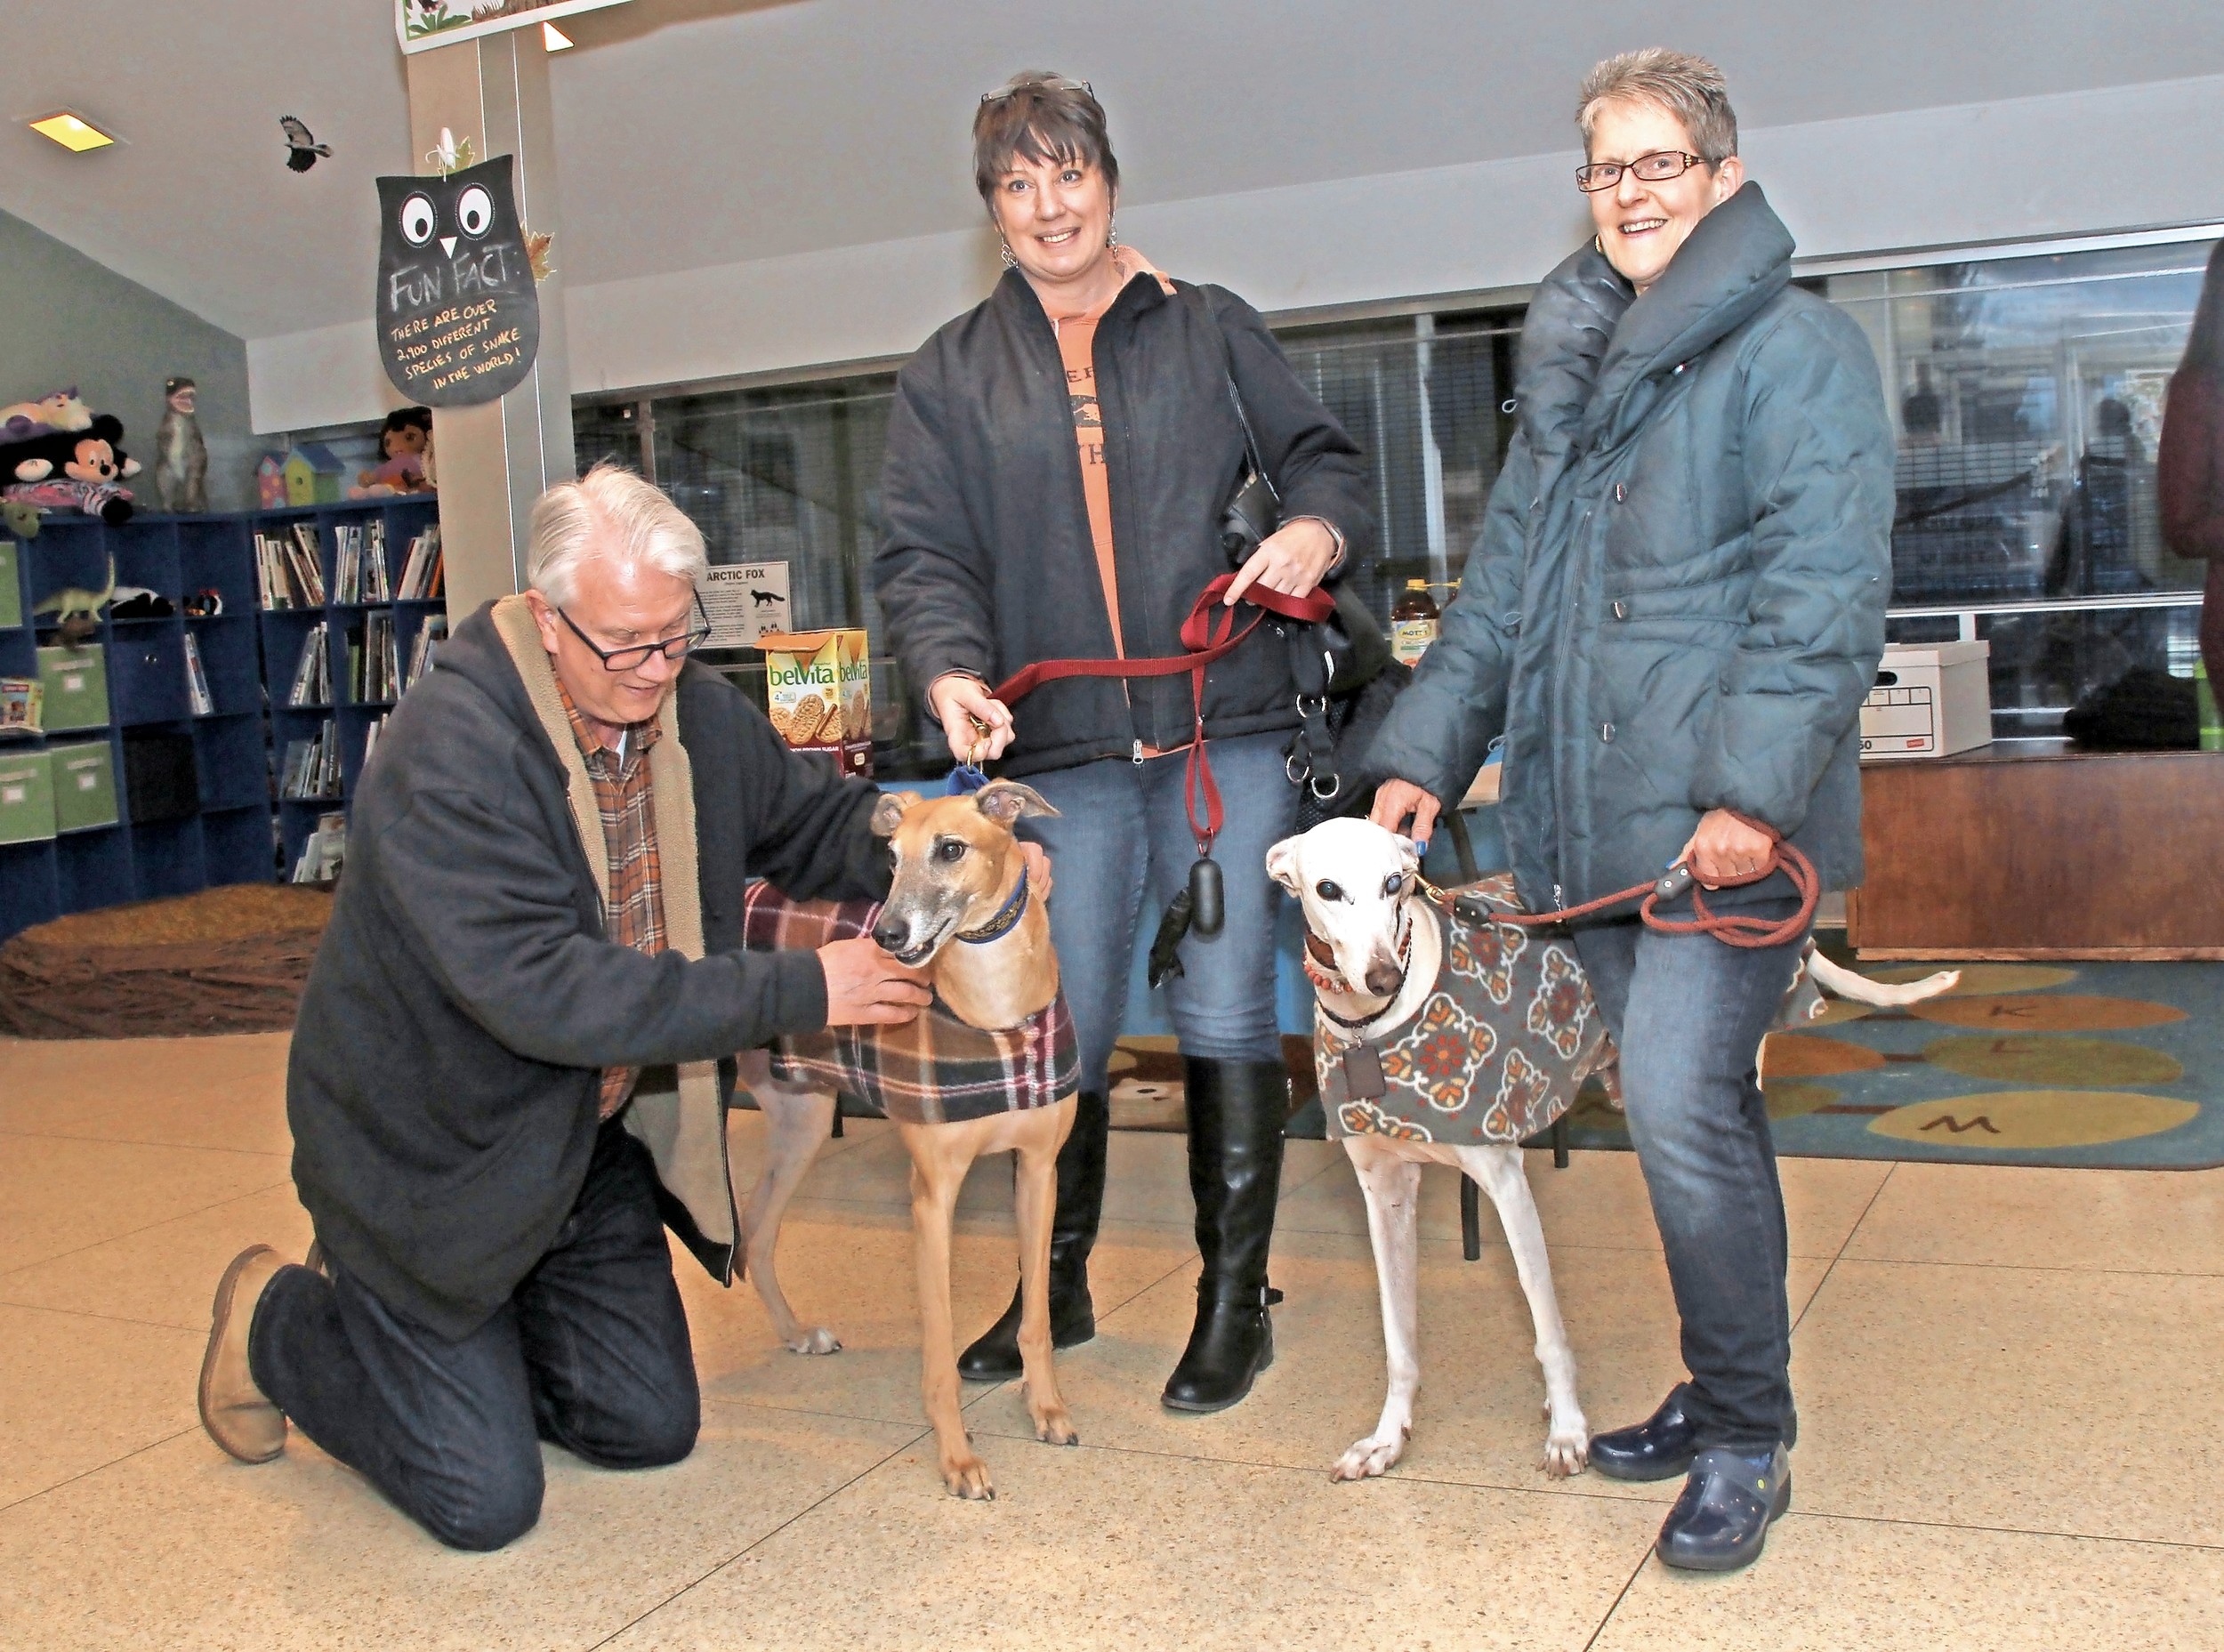 Peter Ruffner, left, a Friends of Tackapausha board member, met Liz Perry and her greyhound, Murphy; and Nancy Nelson and her dog, Pablo.